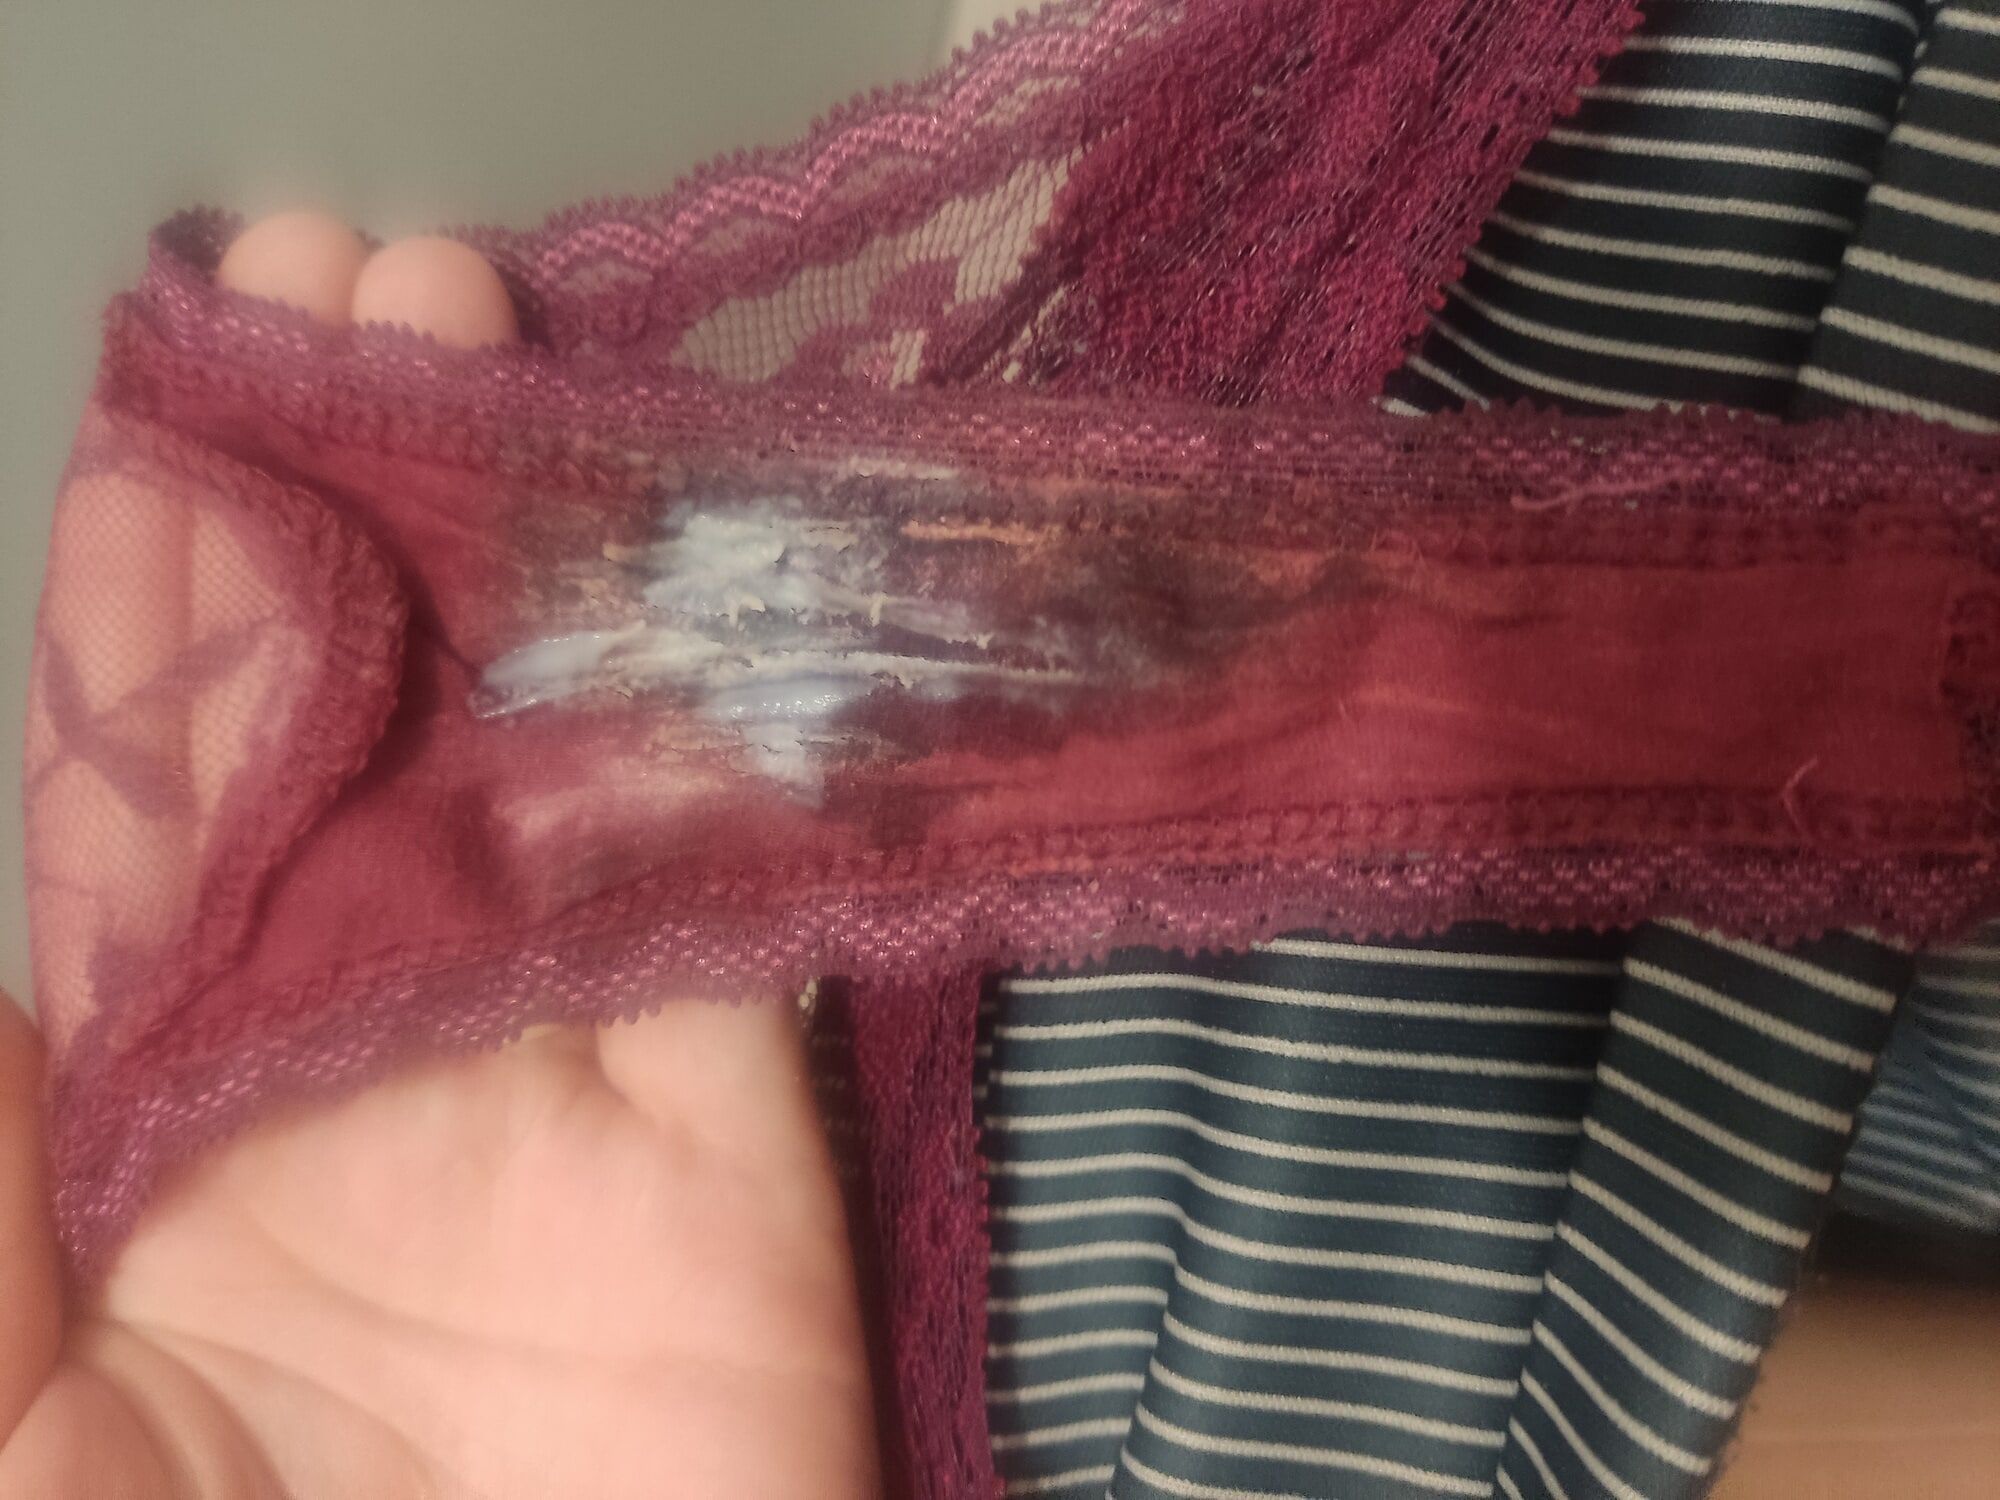 Cum on panties as the buyer requested! 24h wear,cum,workouts #3